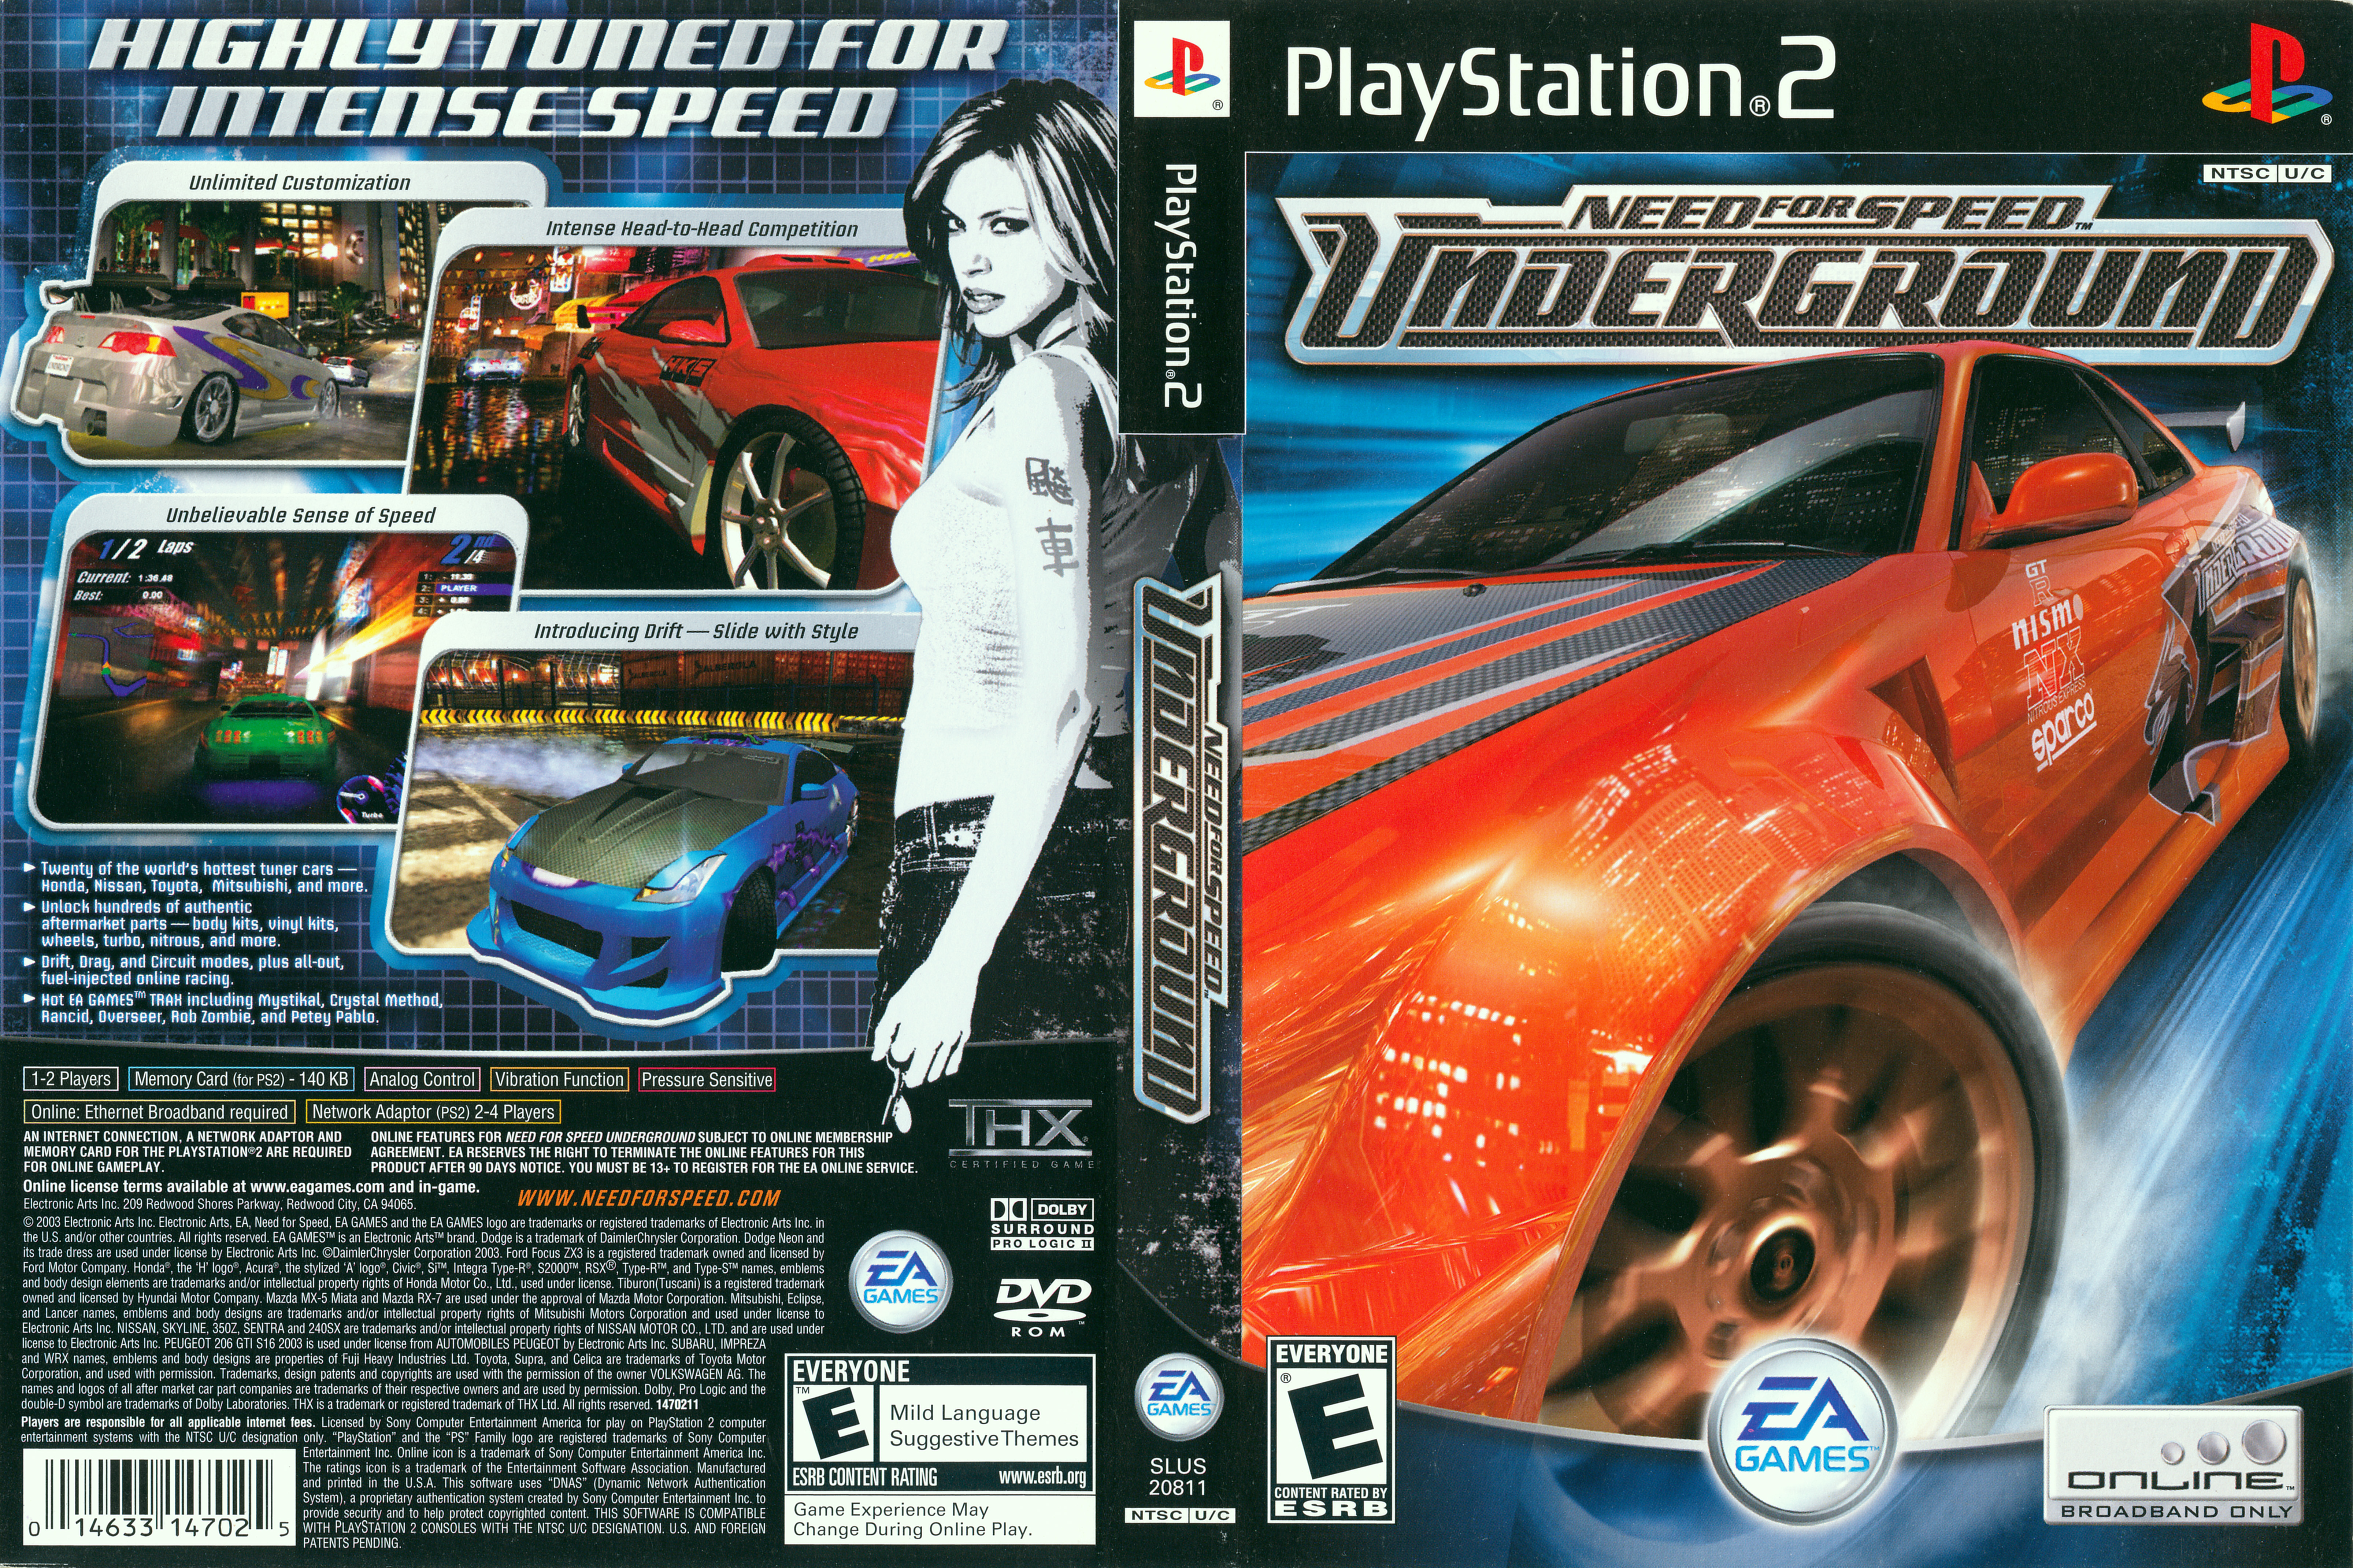 Need for speed underground сохранение. Ps2 диск need for Speed. Sony PLAYSTATION 2 need for Speed. Need for Speed Underground на ПС ПС 4. NFS ps2.